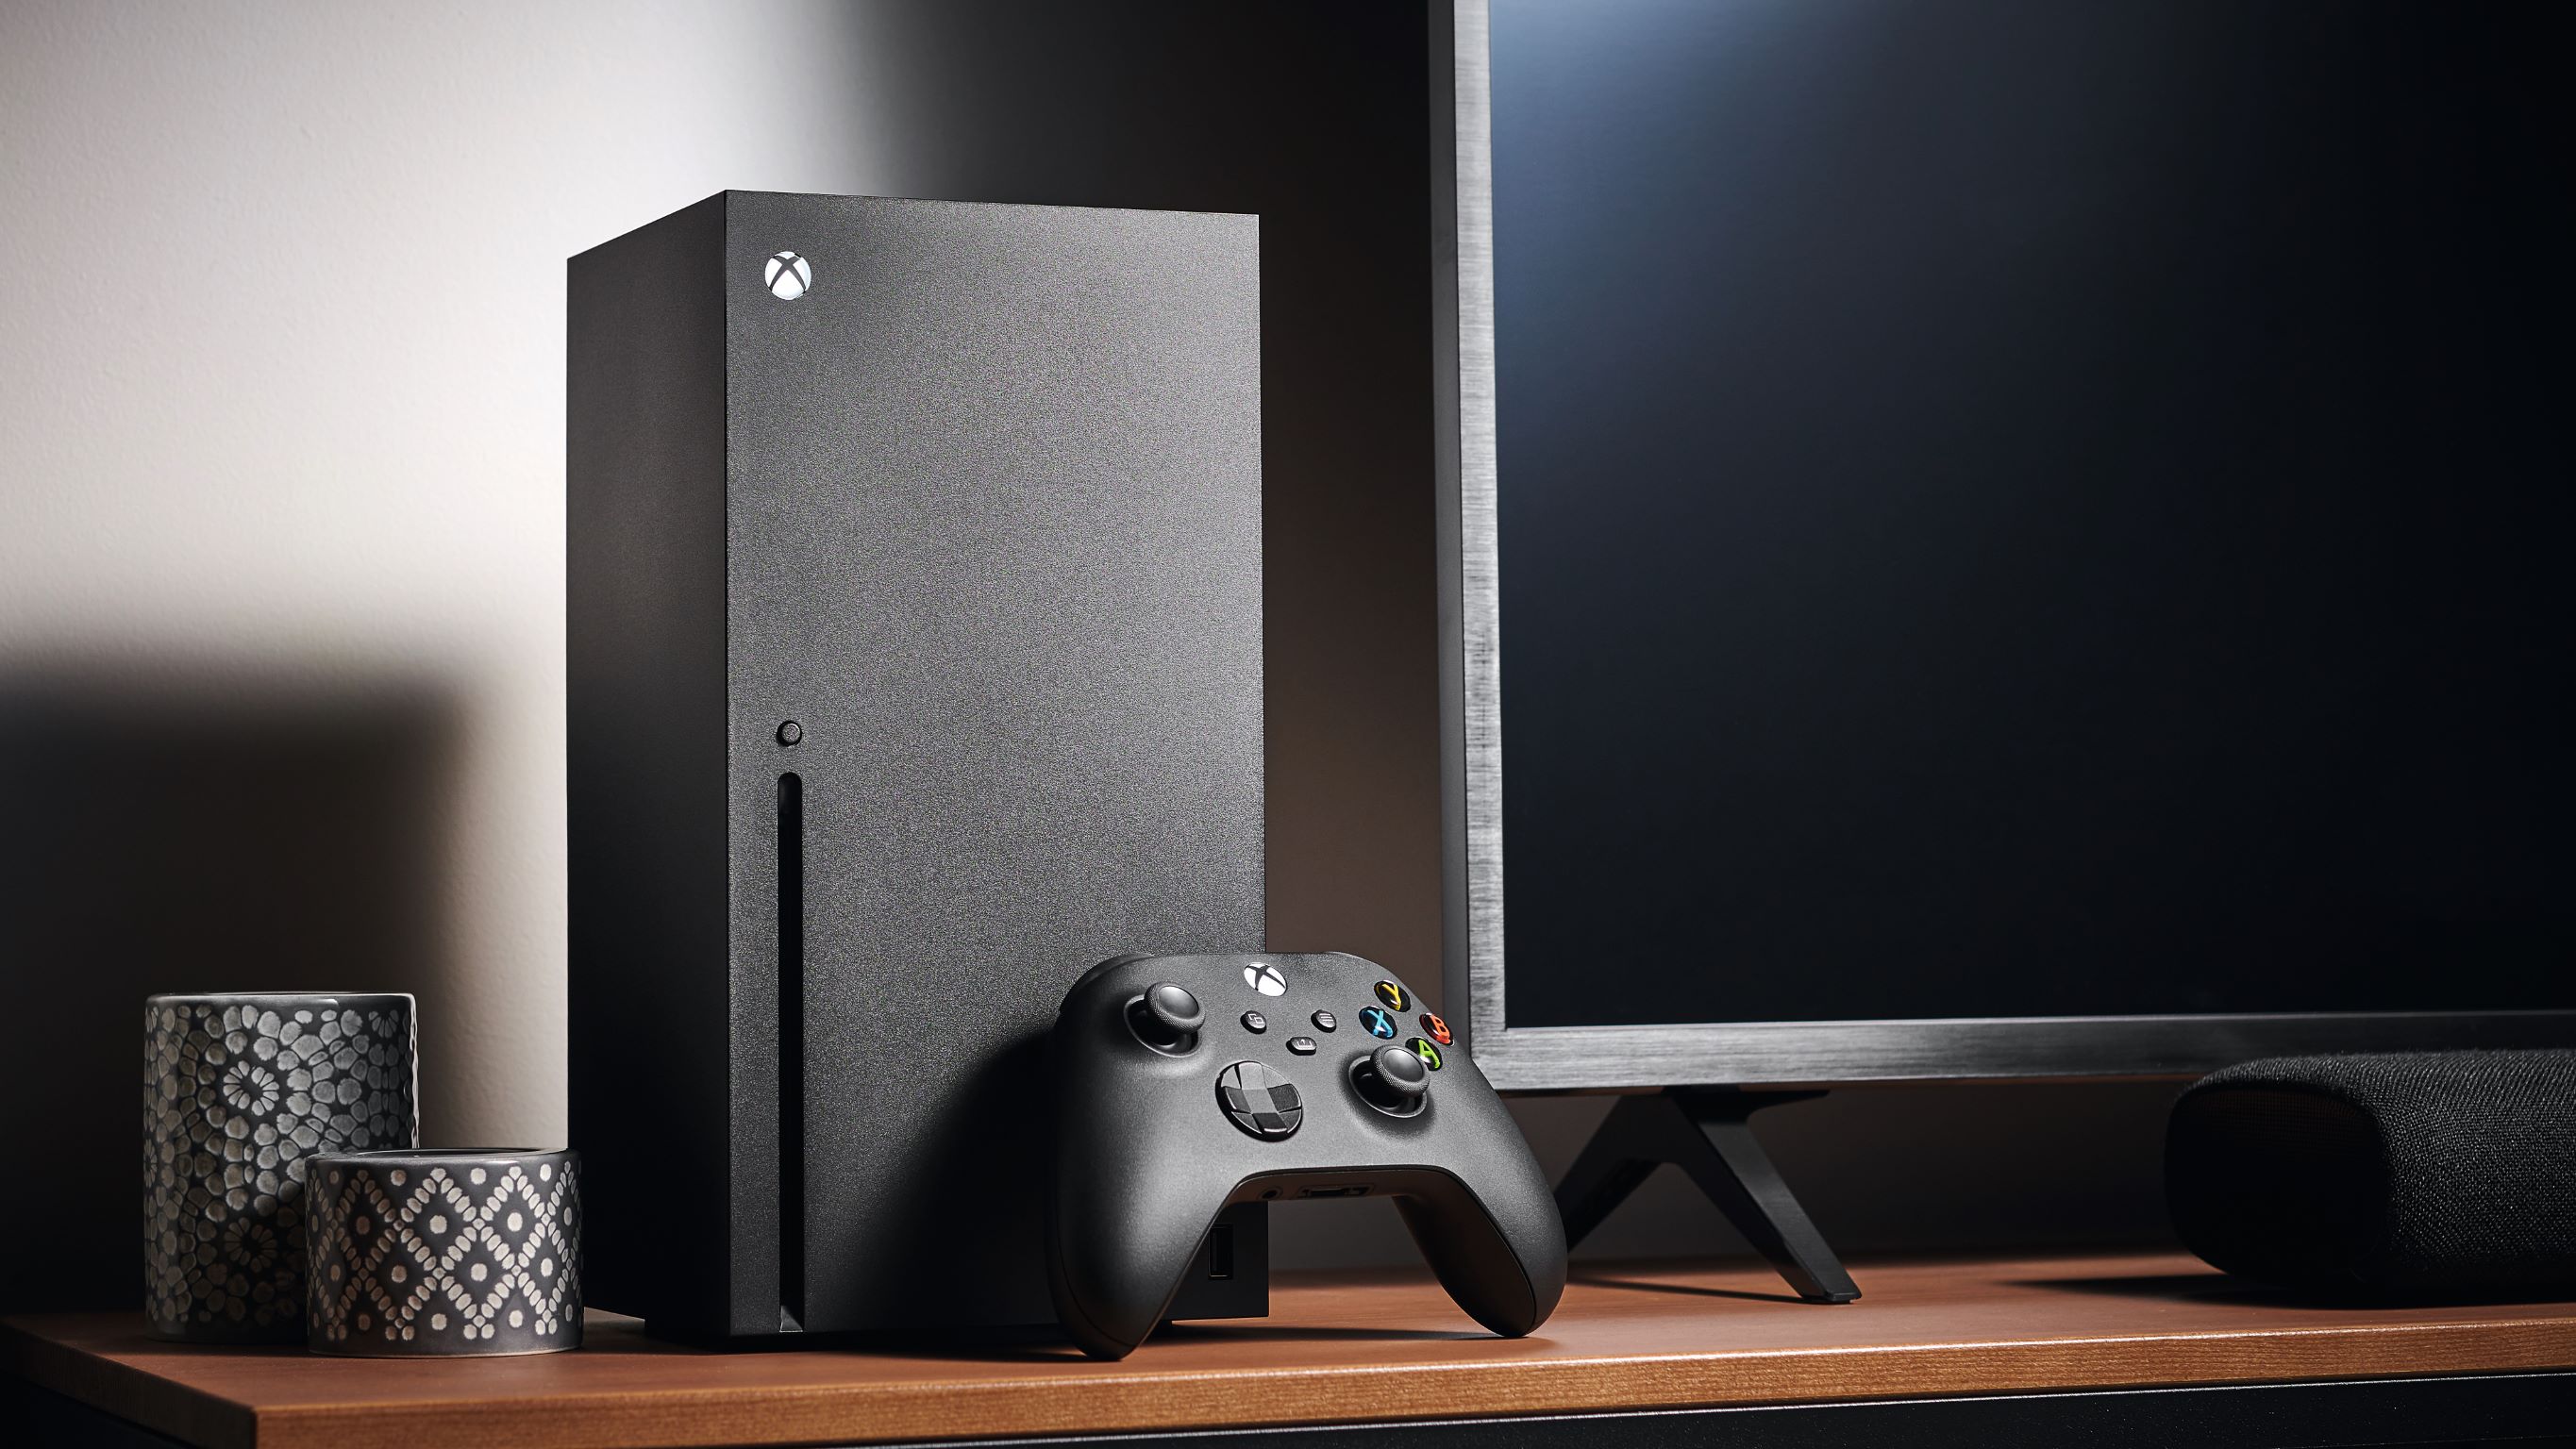 An Xbox Series X and a Controller on a TV stand